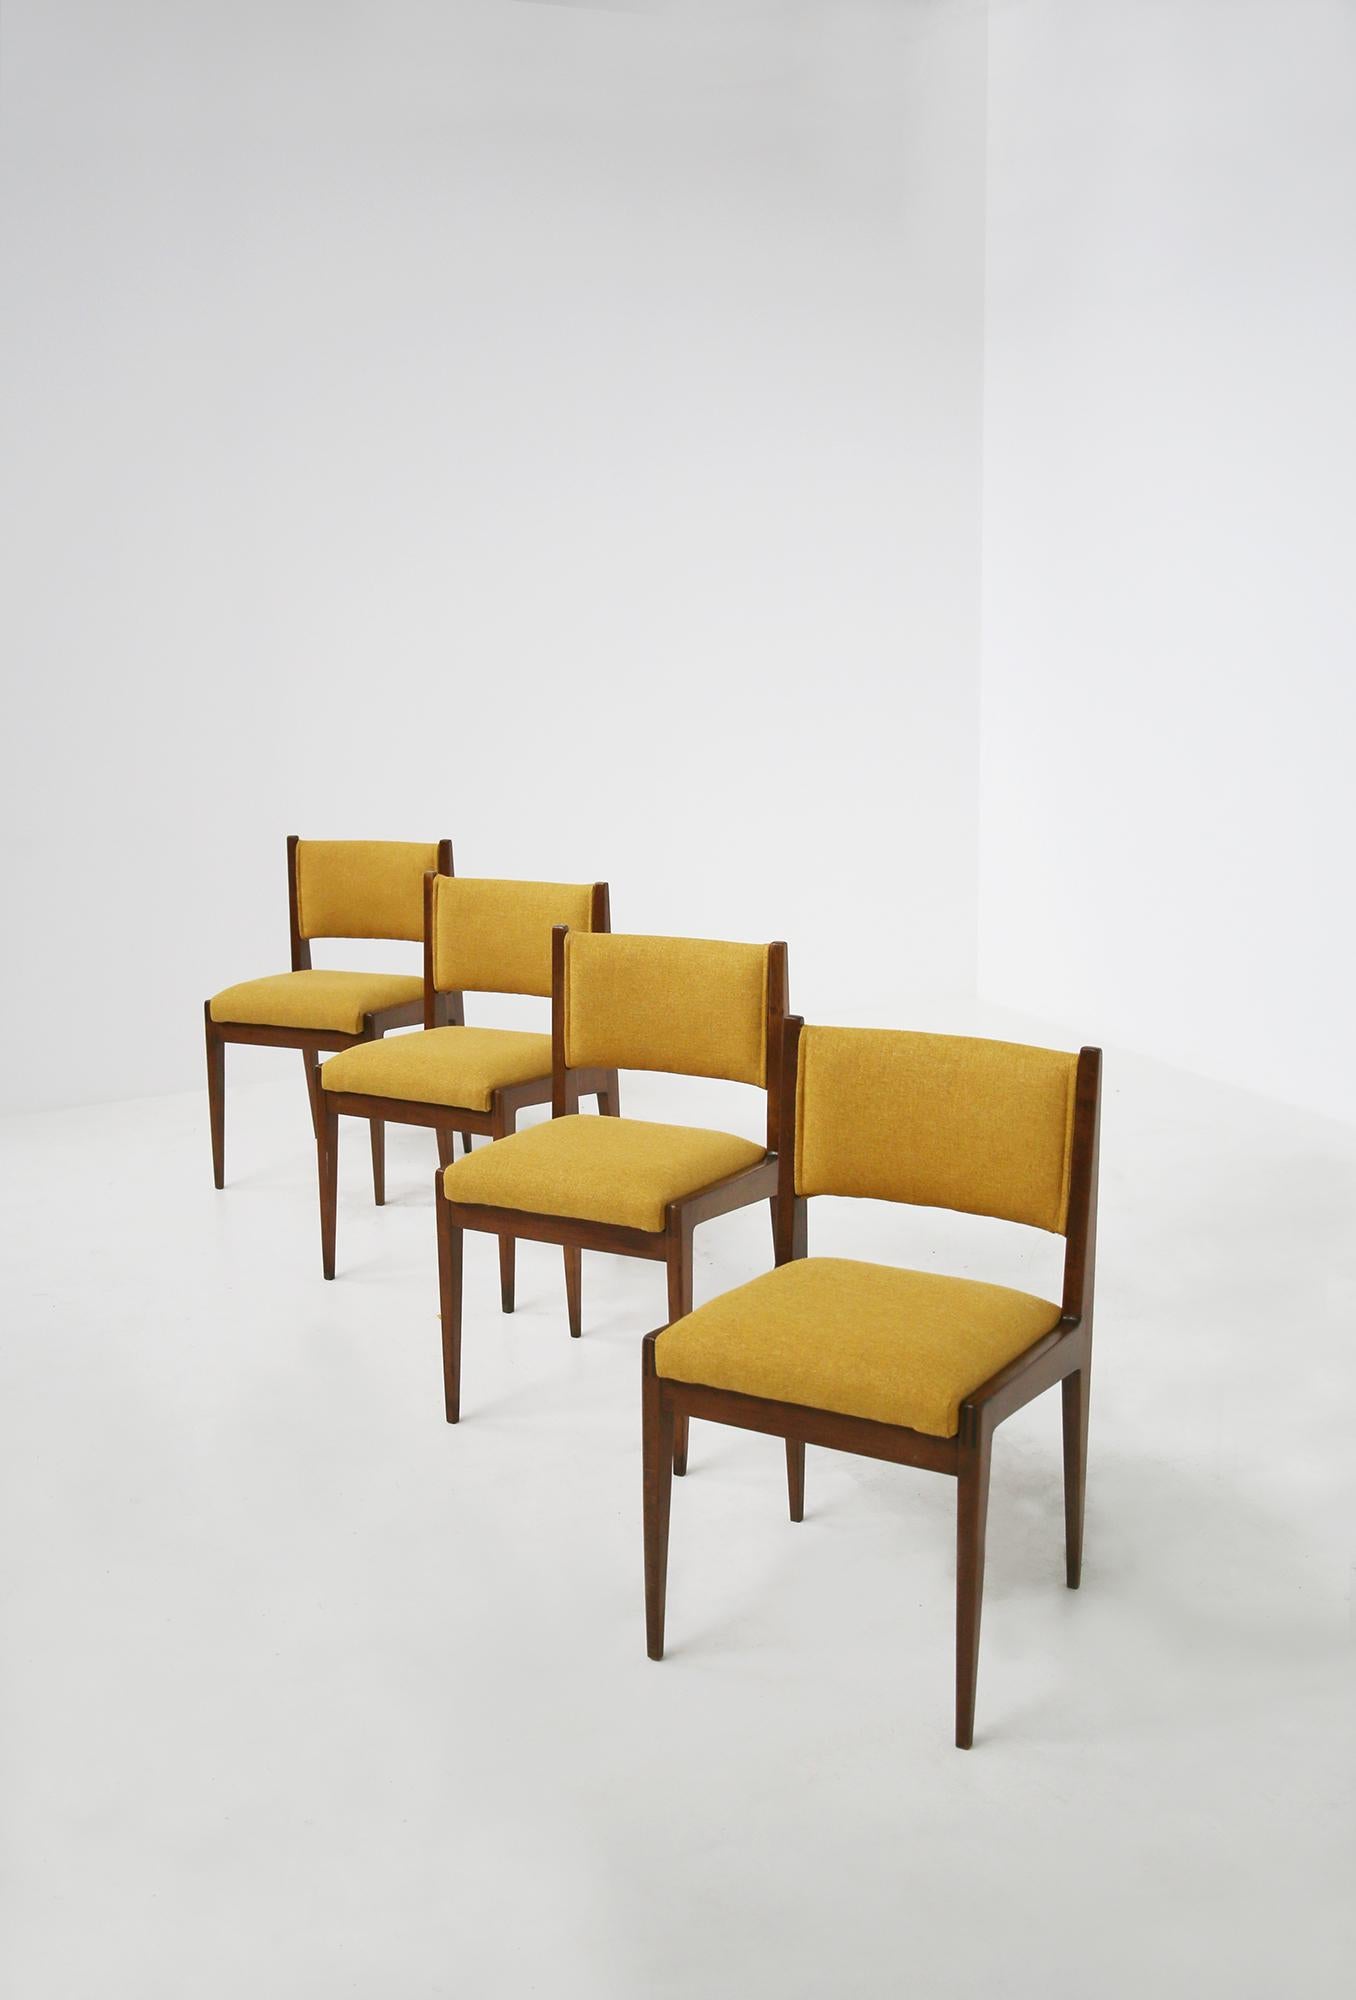 Set composed of four elegant Italian chairs designed by Gianfranco Frattini for Bottega Ghianda. The chairs are from 1970. The set is made of walnut wood with yellow Italian cotton padding. The peculiarity of the chairs is its sculpted line with